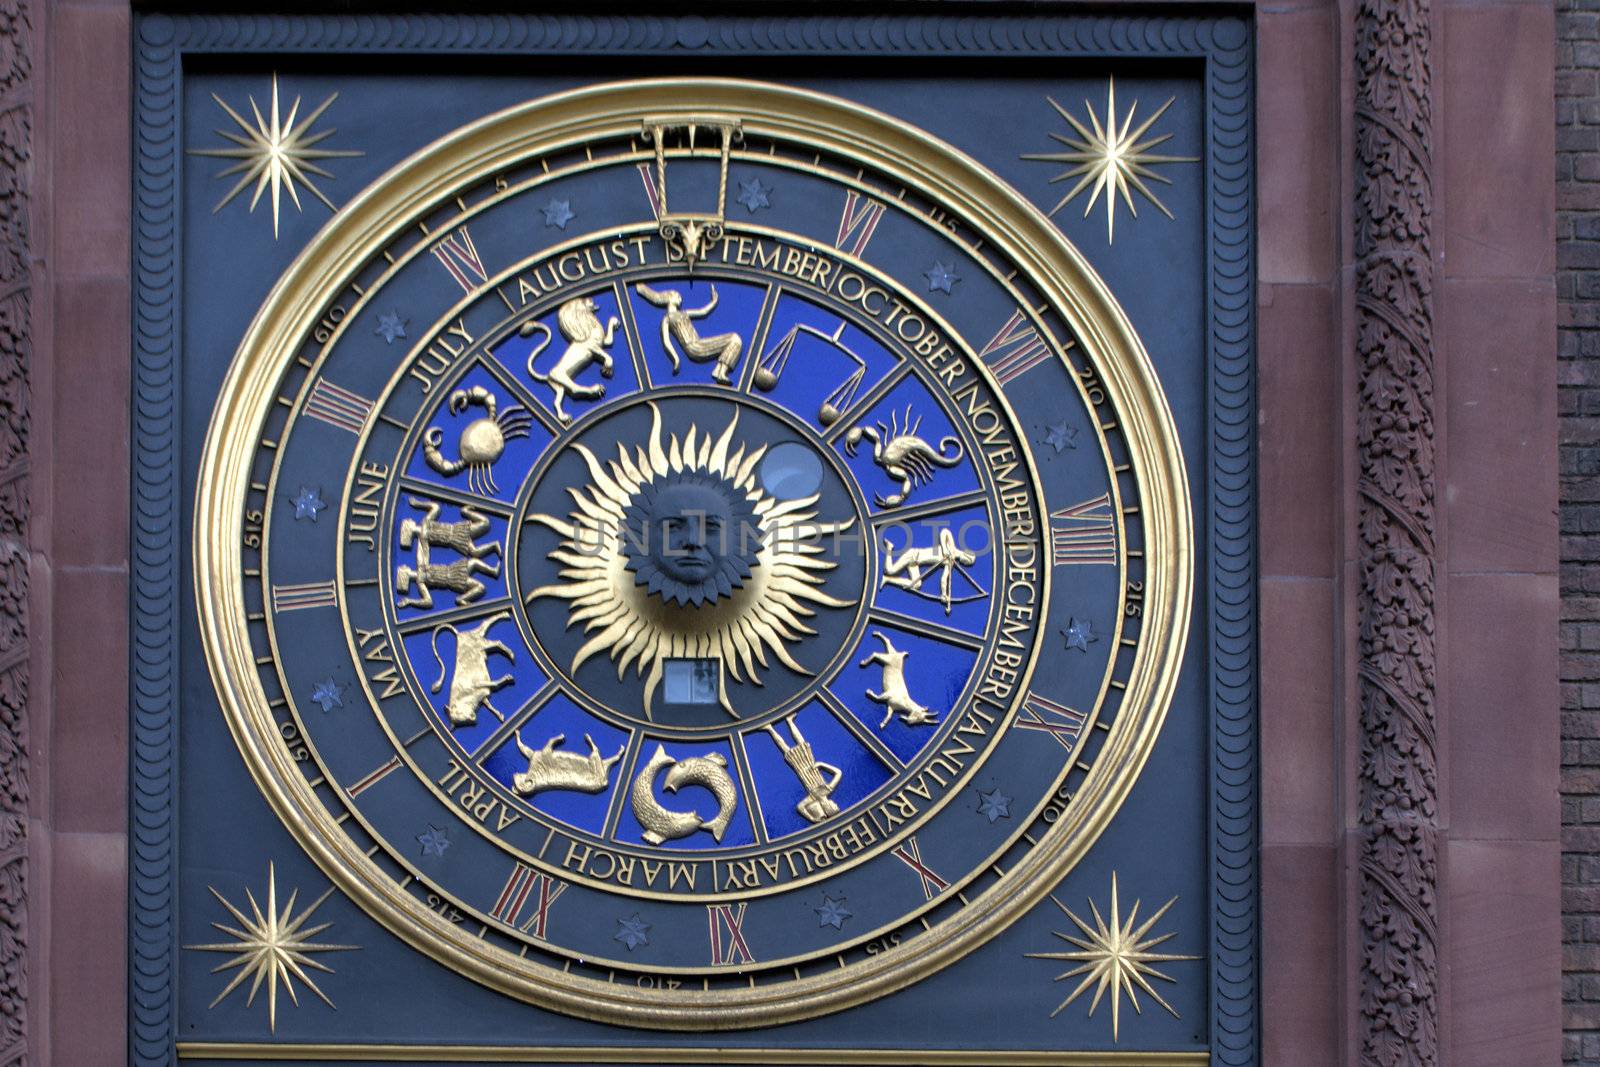 Astrological clock in city of london